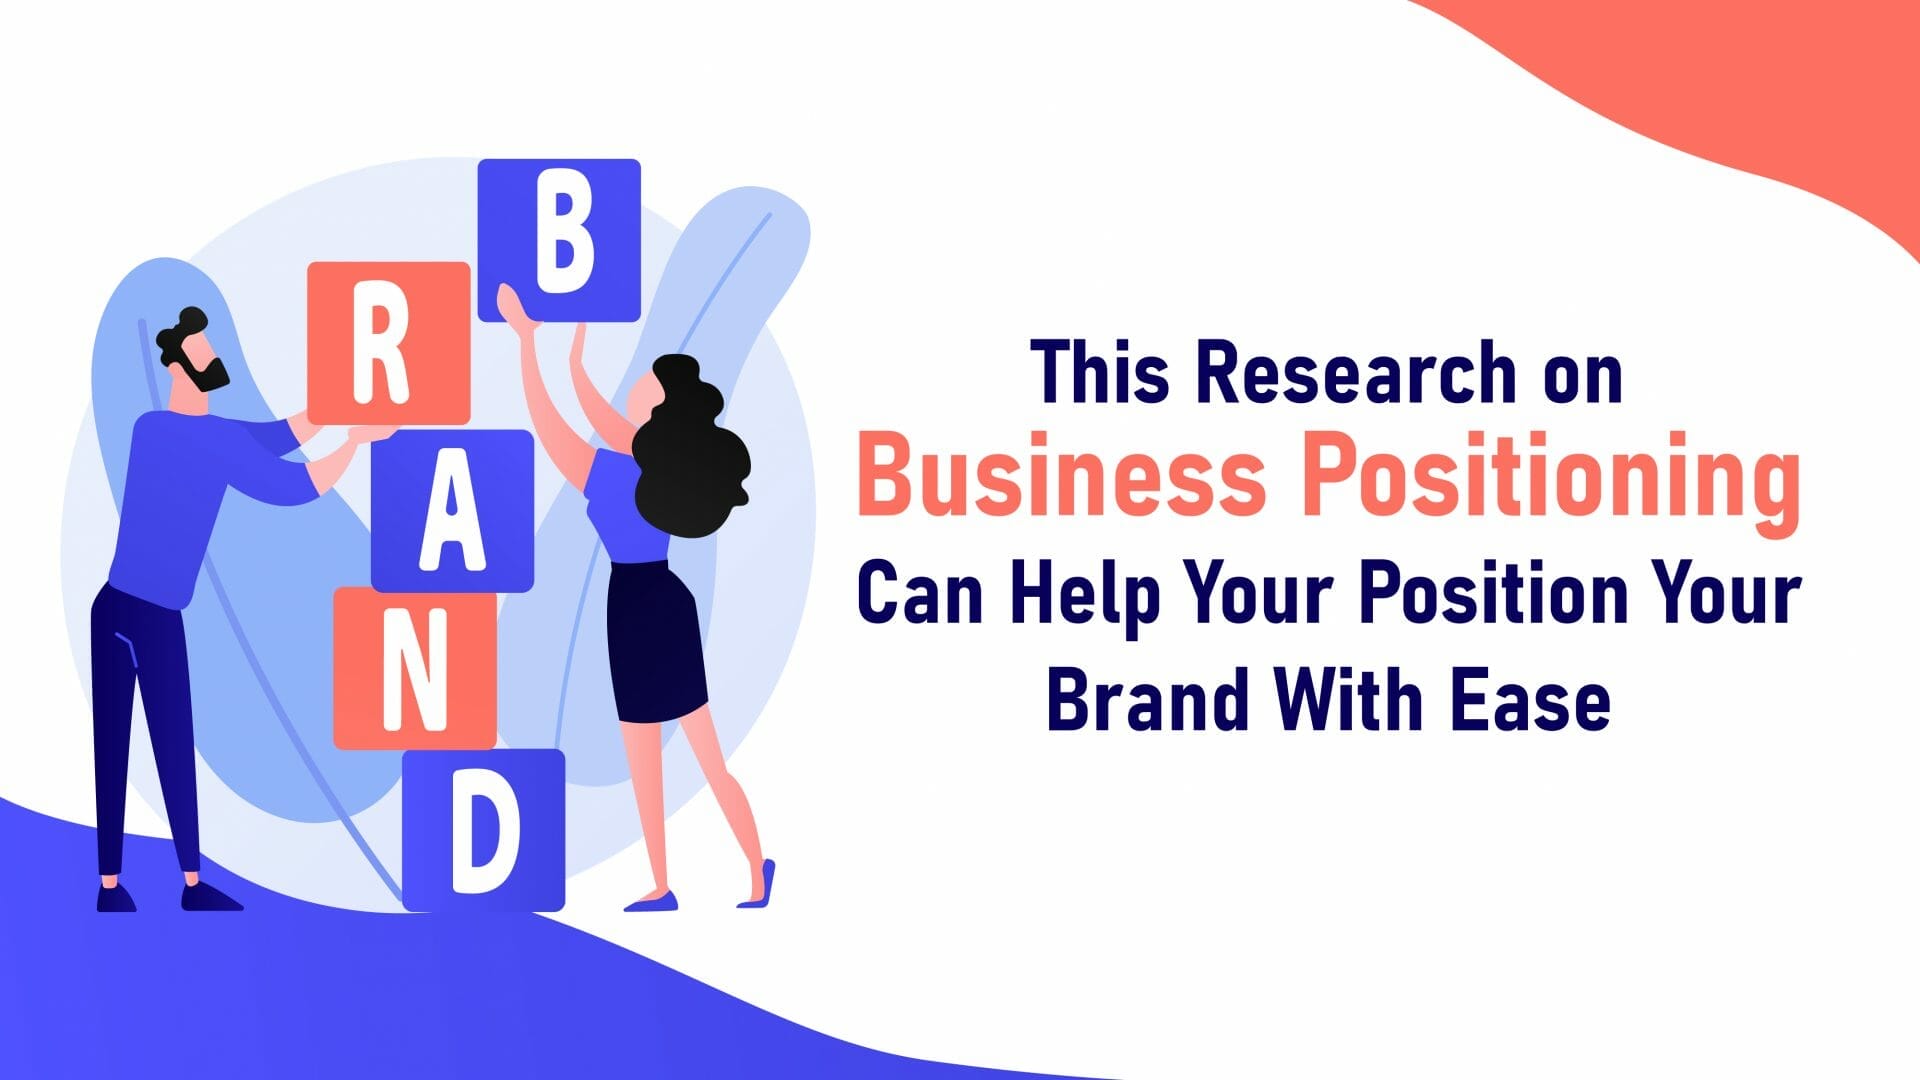 This Research on Business Positioning Can Help Your Position Your Brand With Ease